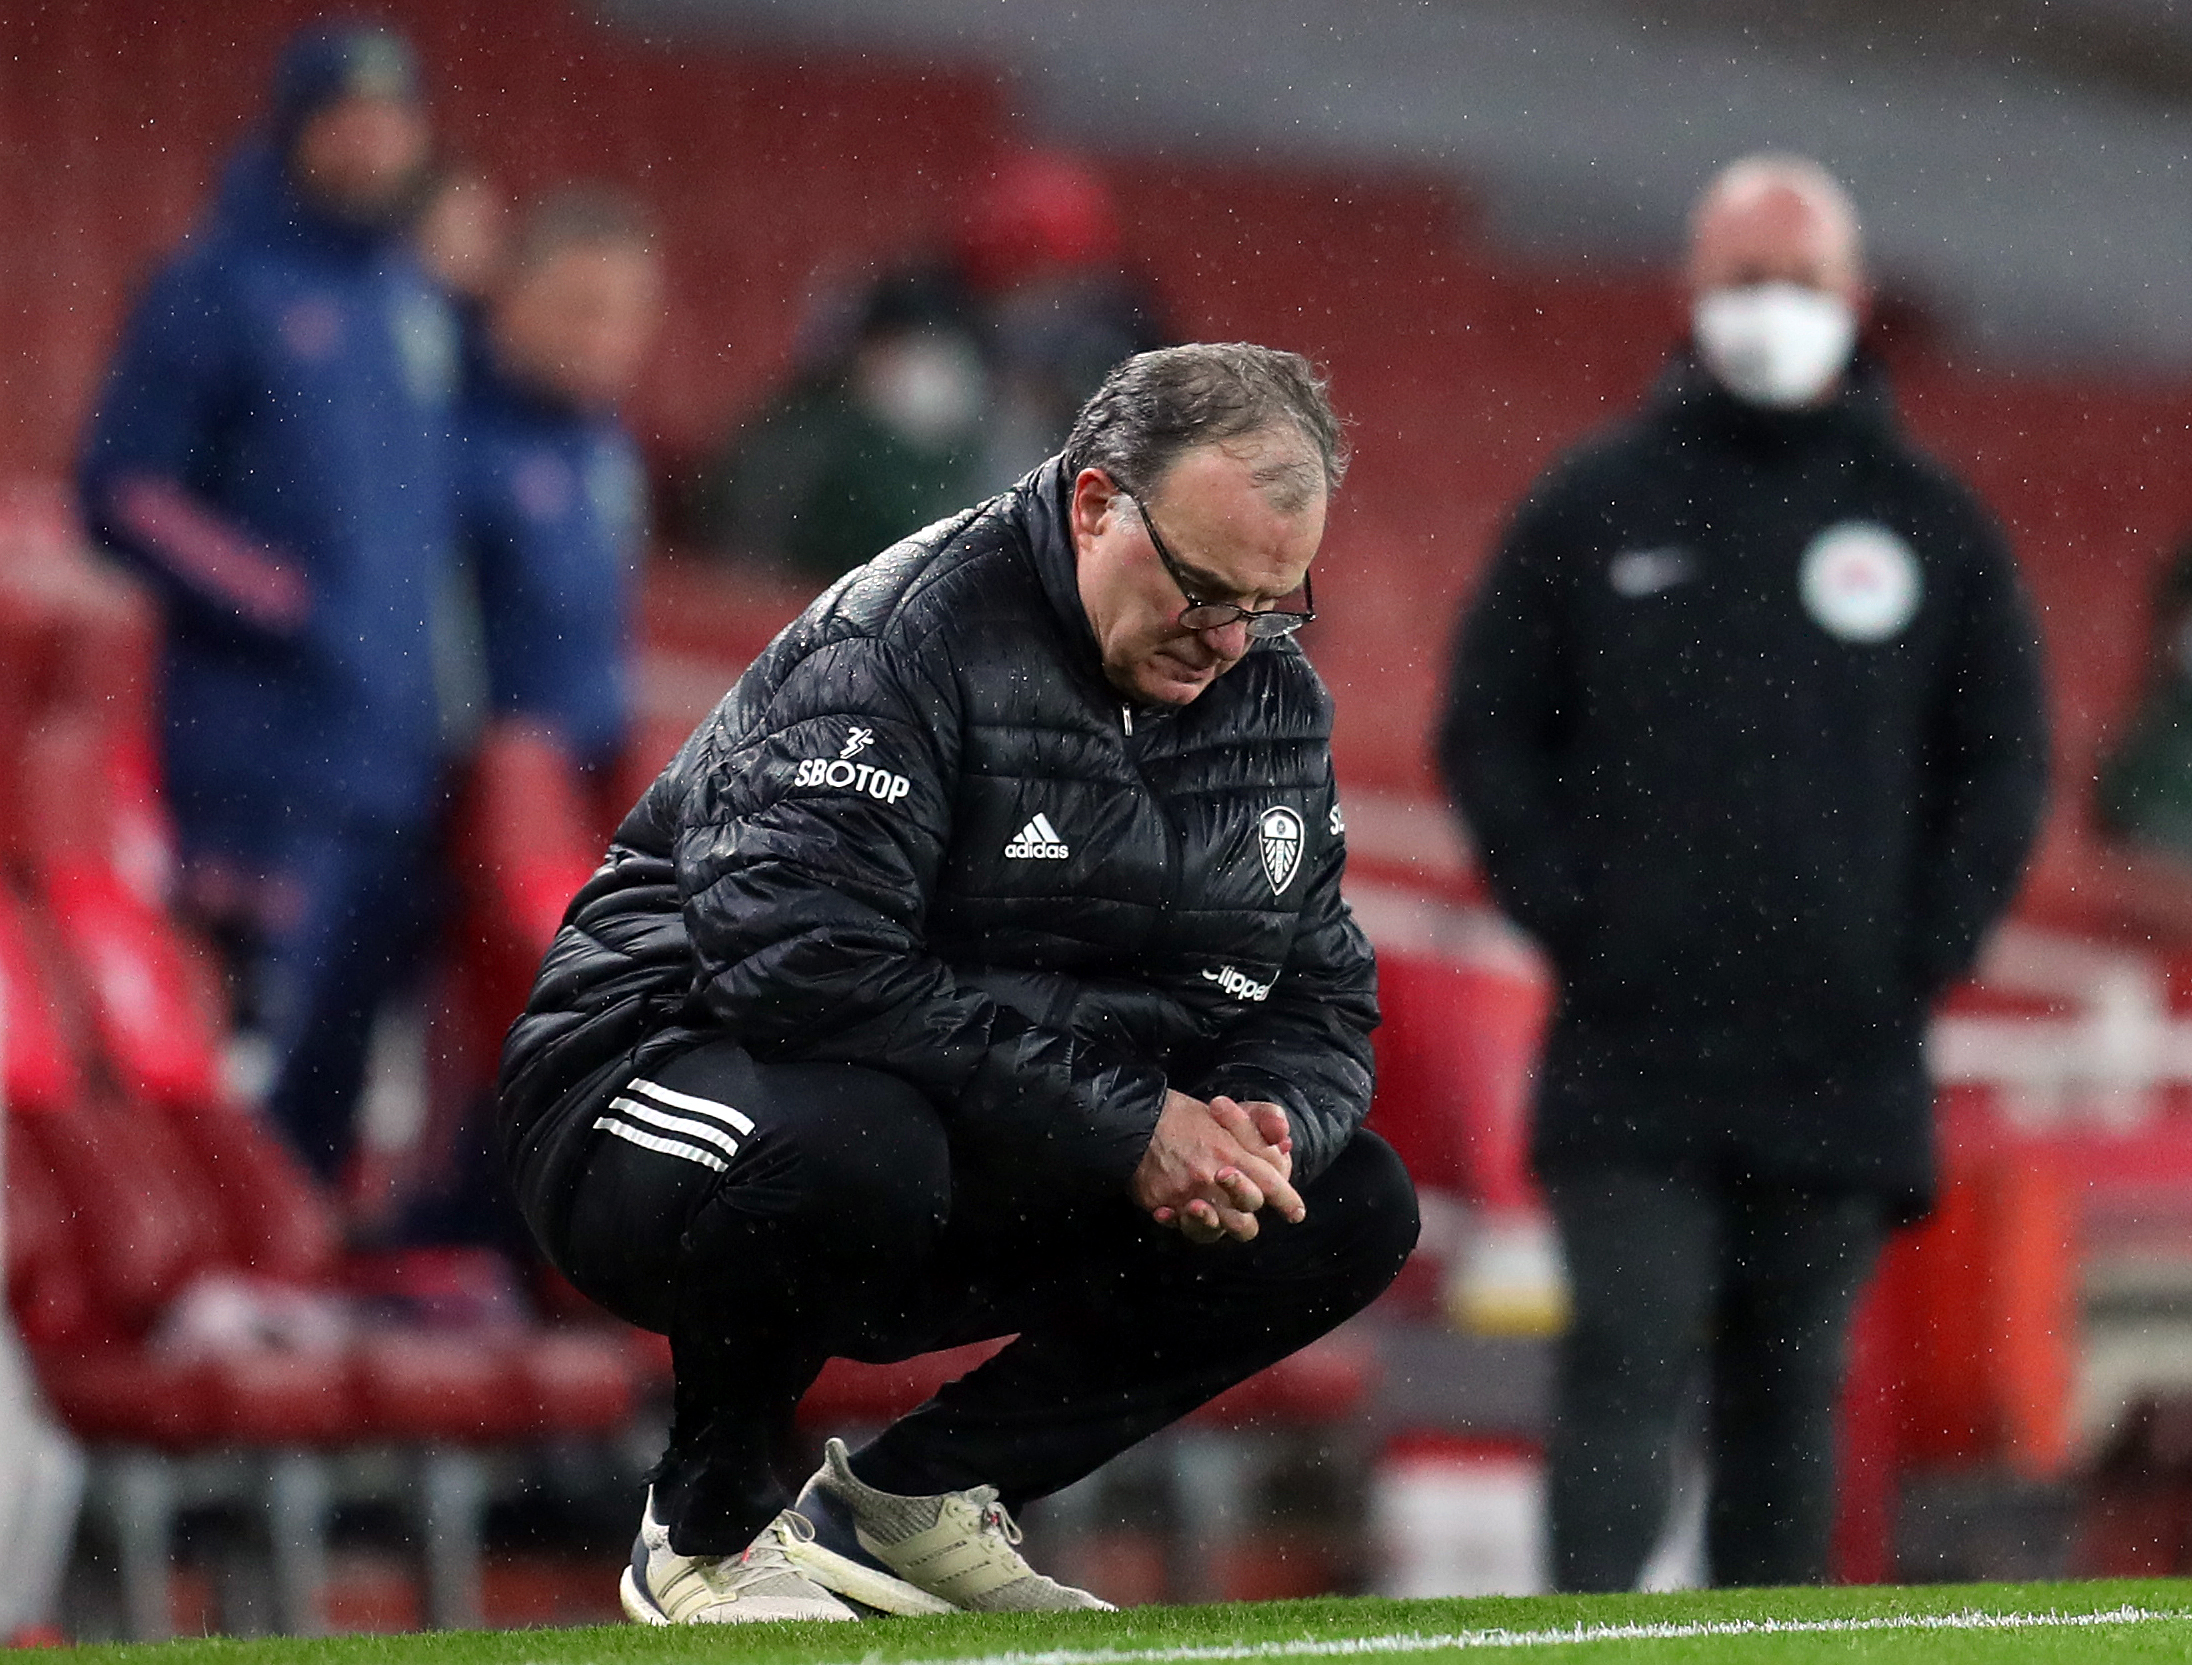 Marcelo Bielsa on the touchline for Leeds United. (GETTY Images)